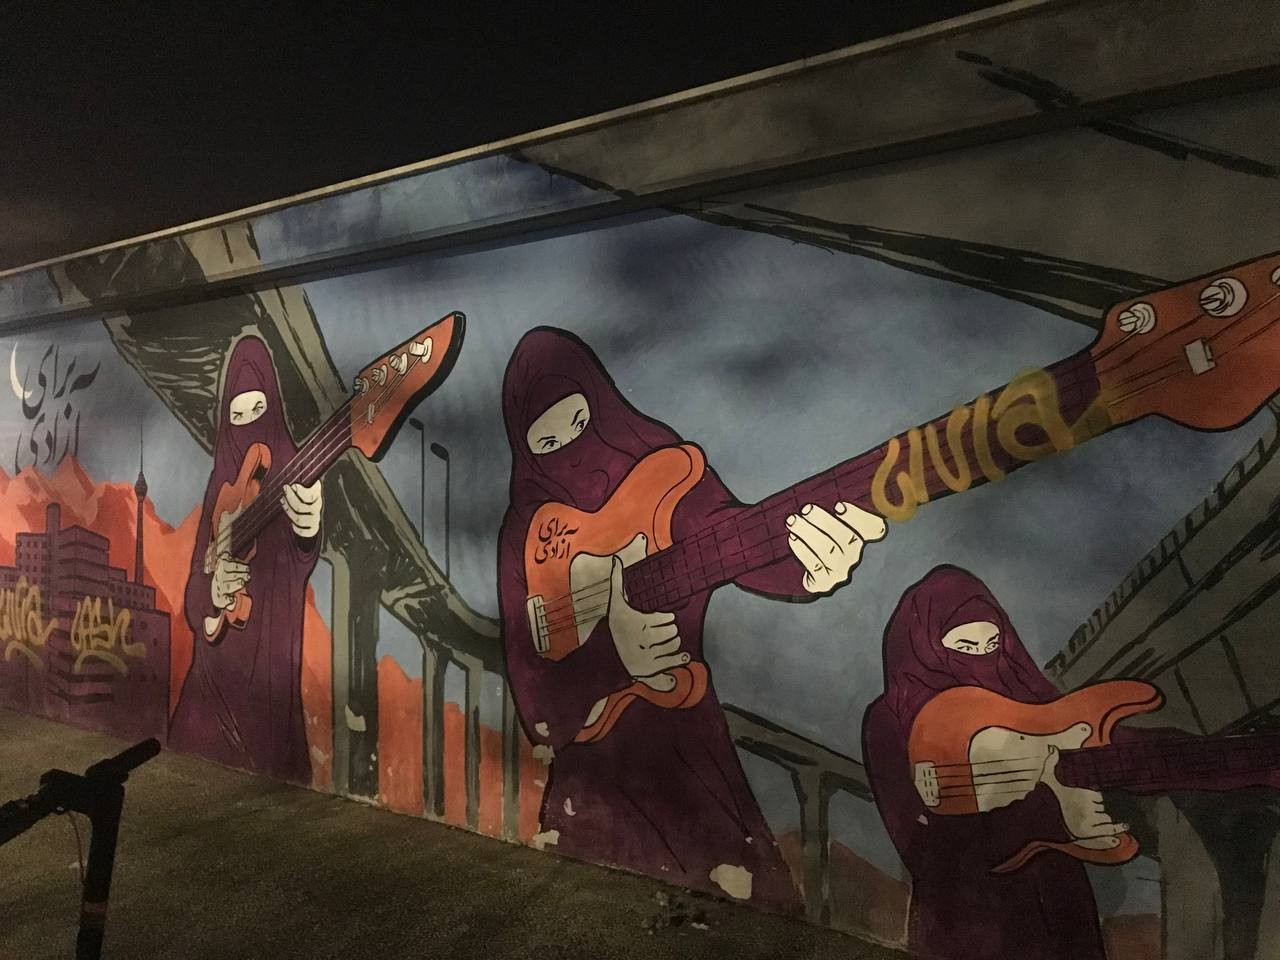 Street Art depicting 3 women in black blog attire rocking out with guitars. On the guitar of the woman in the middle and on the top left corner of the art is written "For Freedom" in Persian.